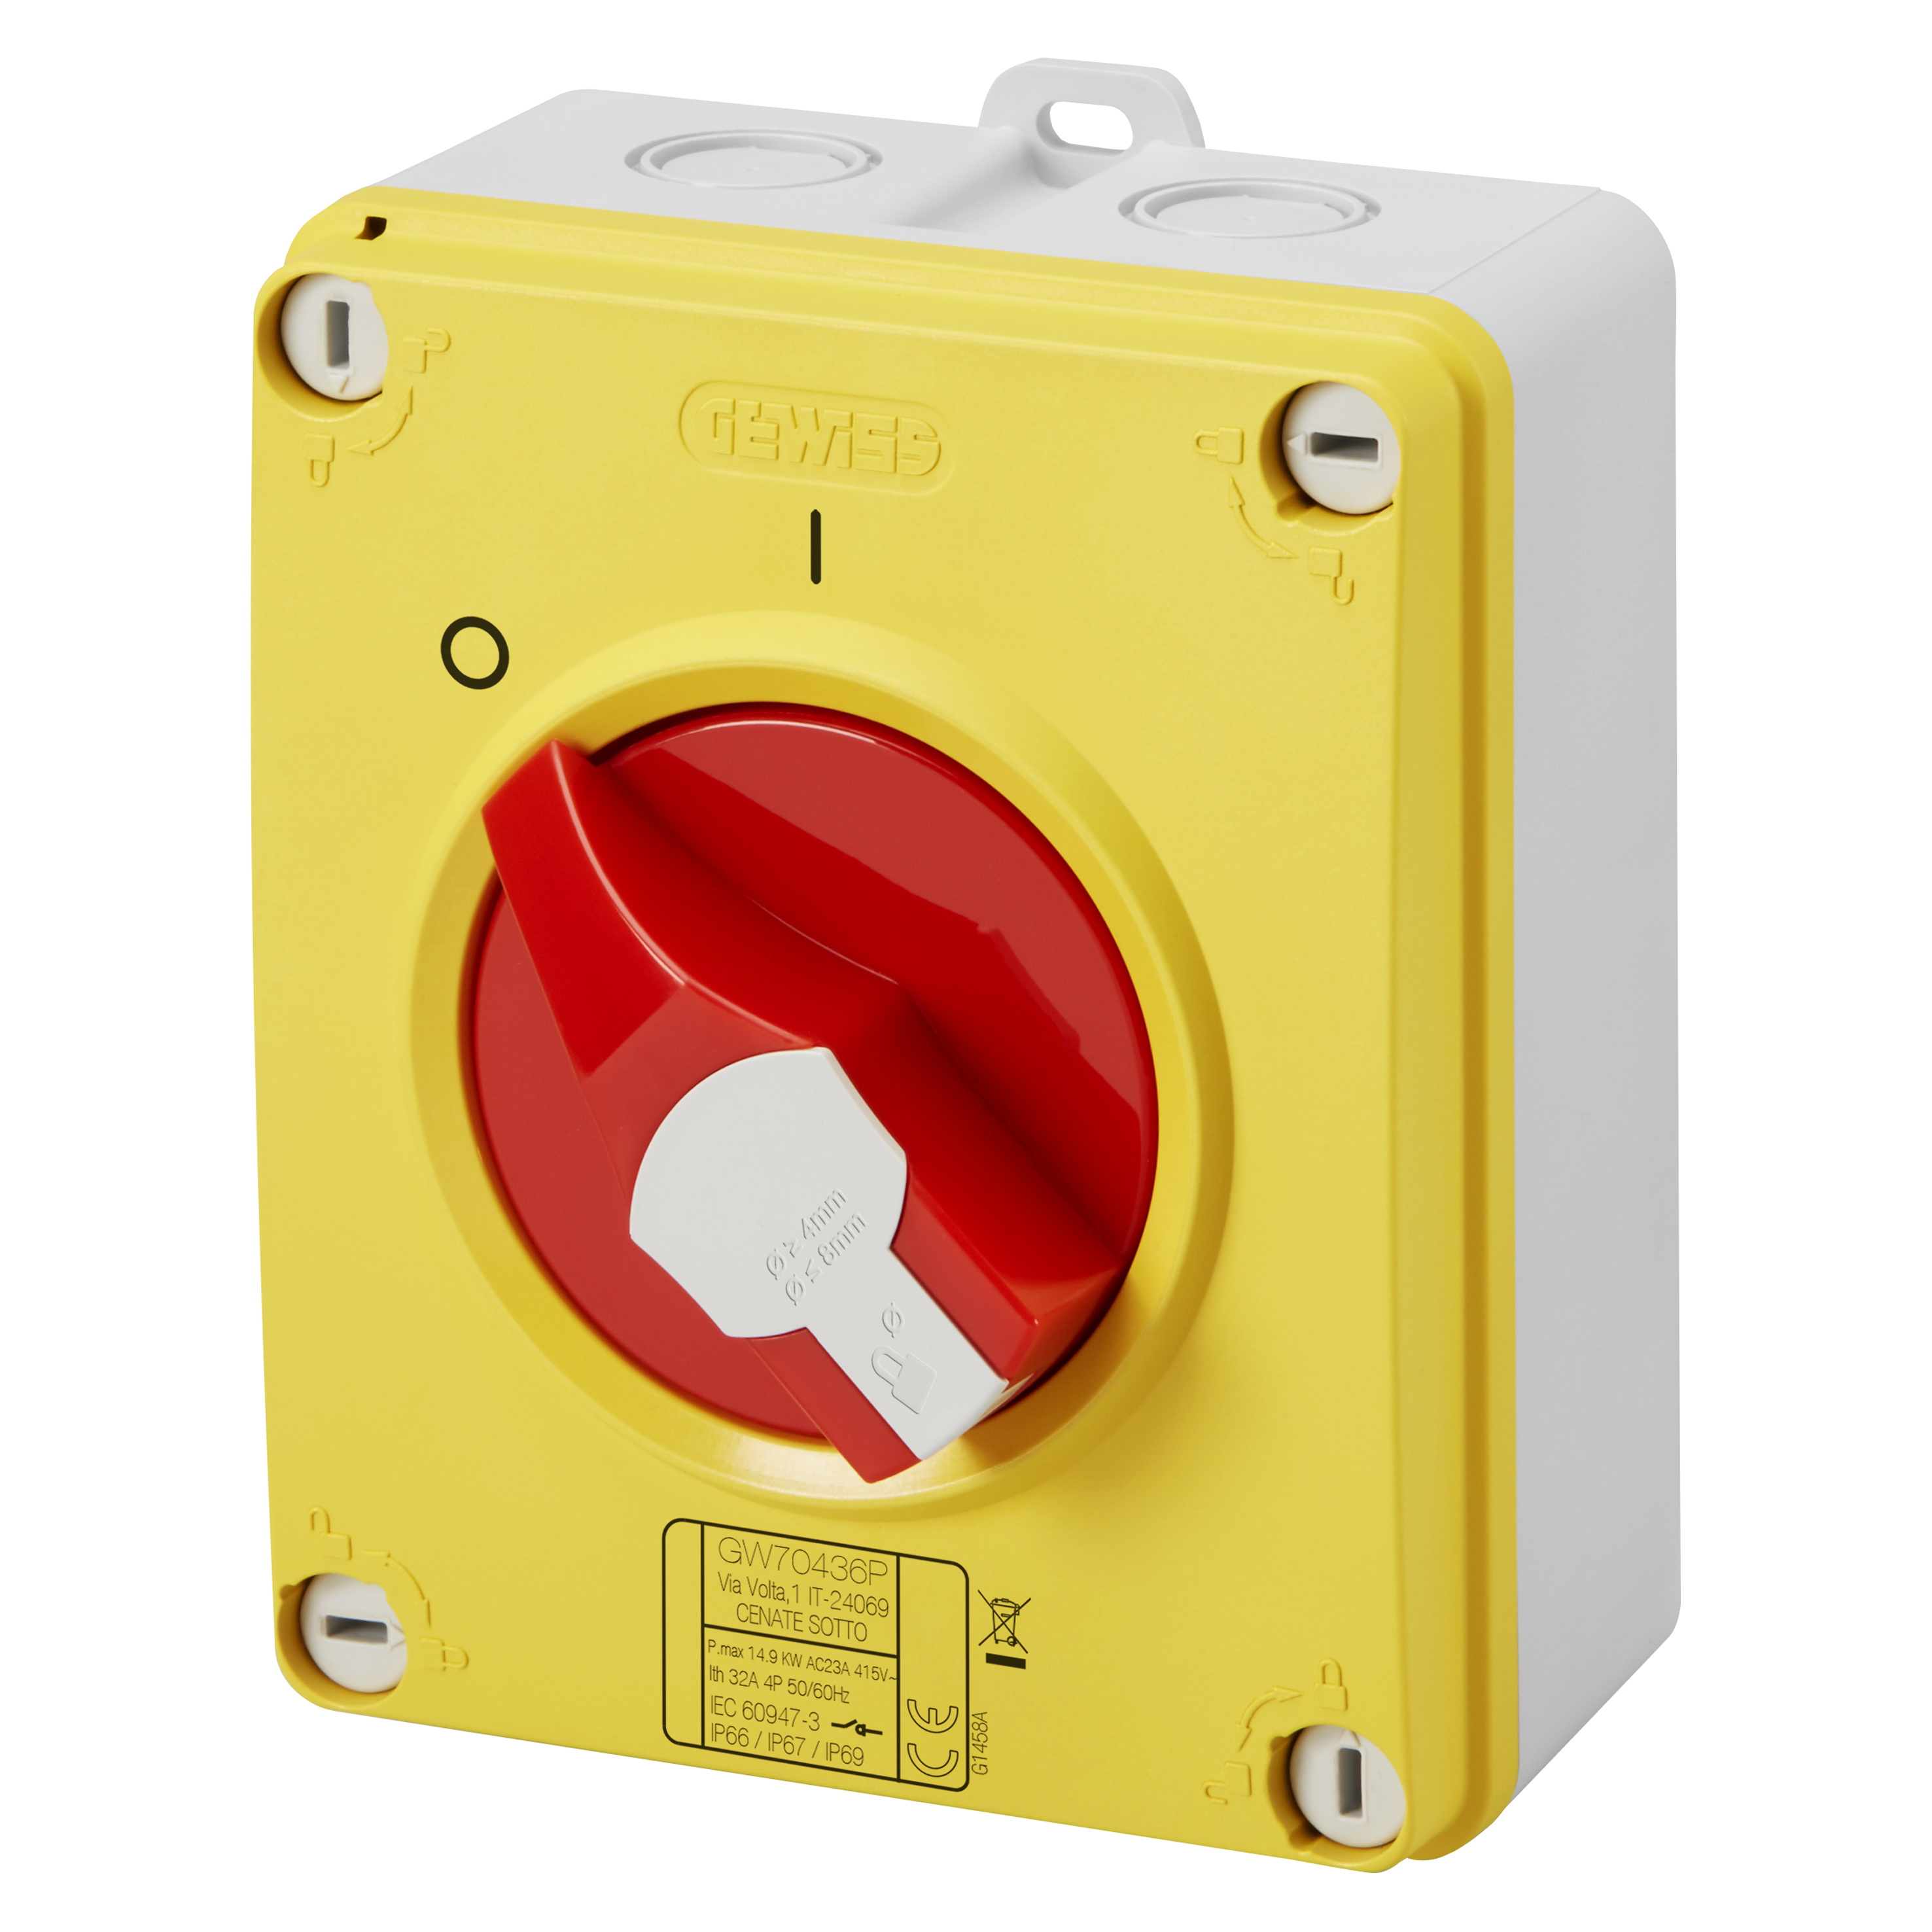 GW70442P Isolator - HP - Emergency - Isolating Material Box - 40A 3P - Lockable Red Knob - IP66/67/69